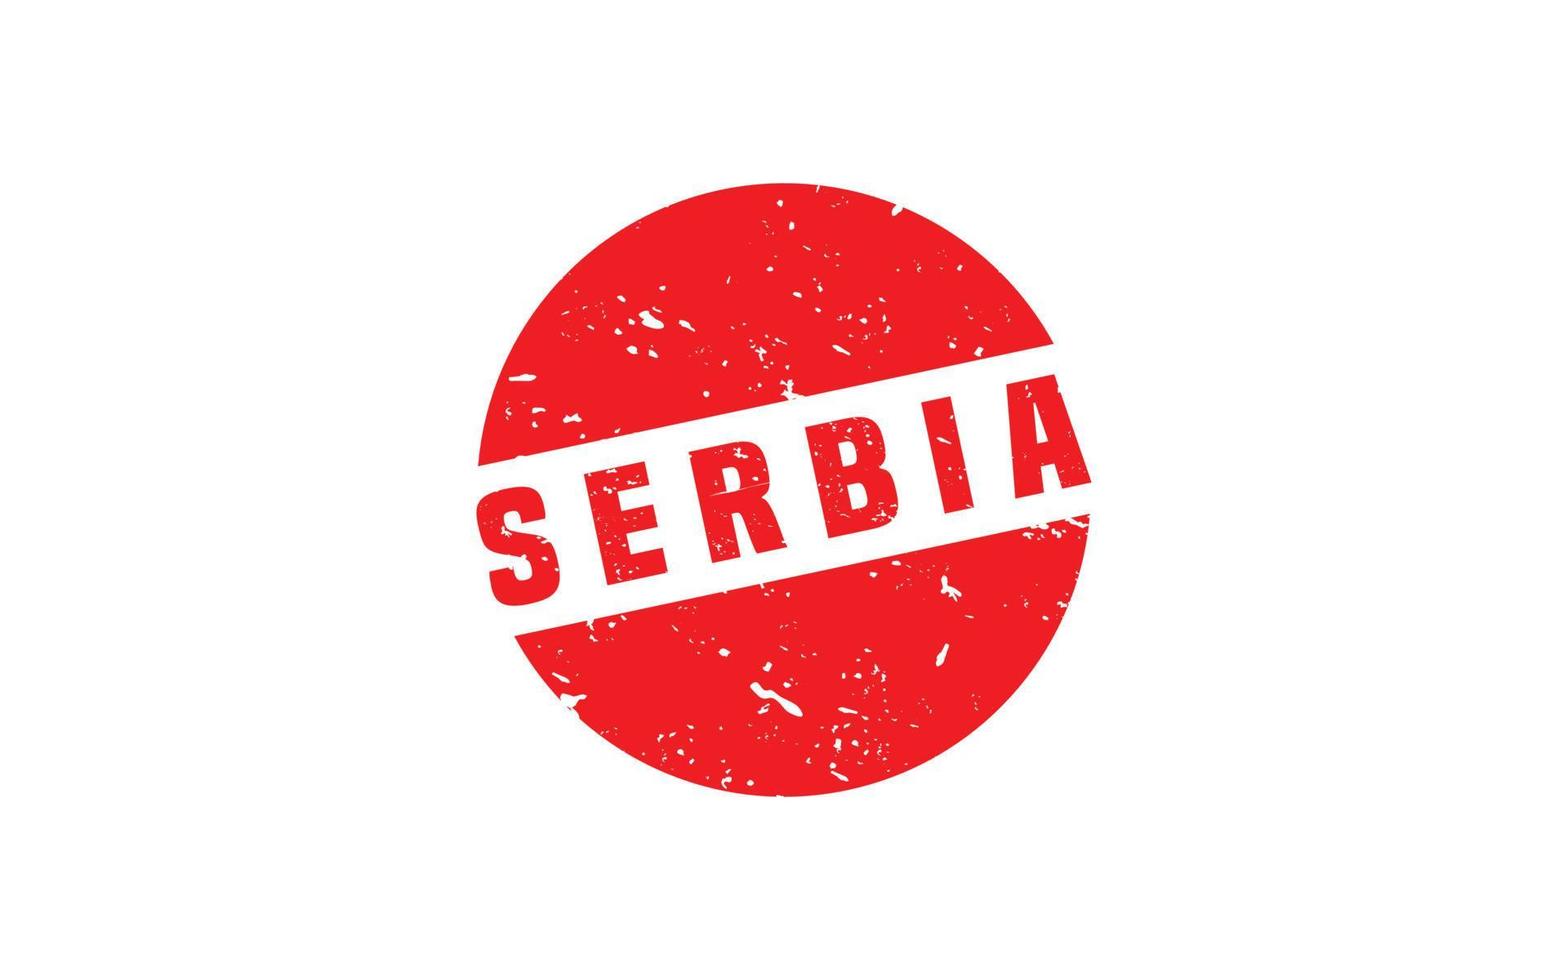 SERBIA stamp rubber with grunge style on white background vector